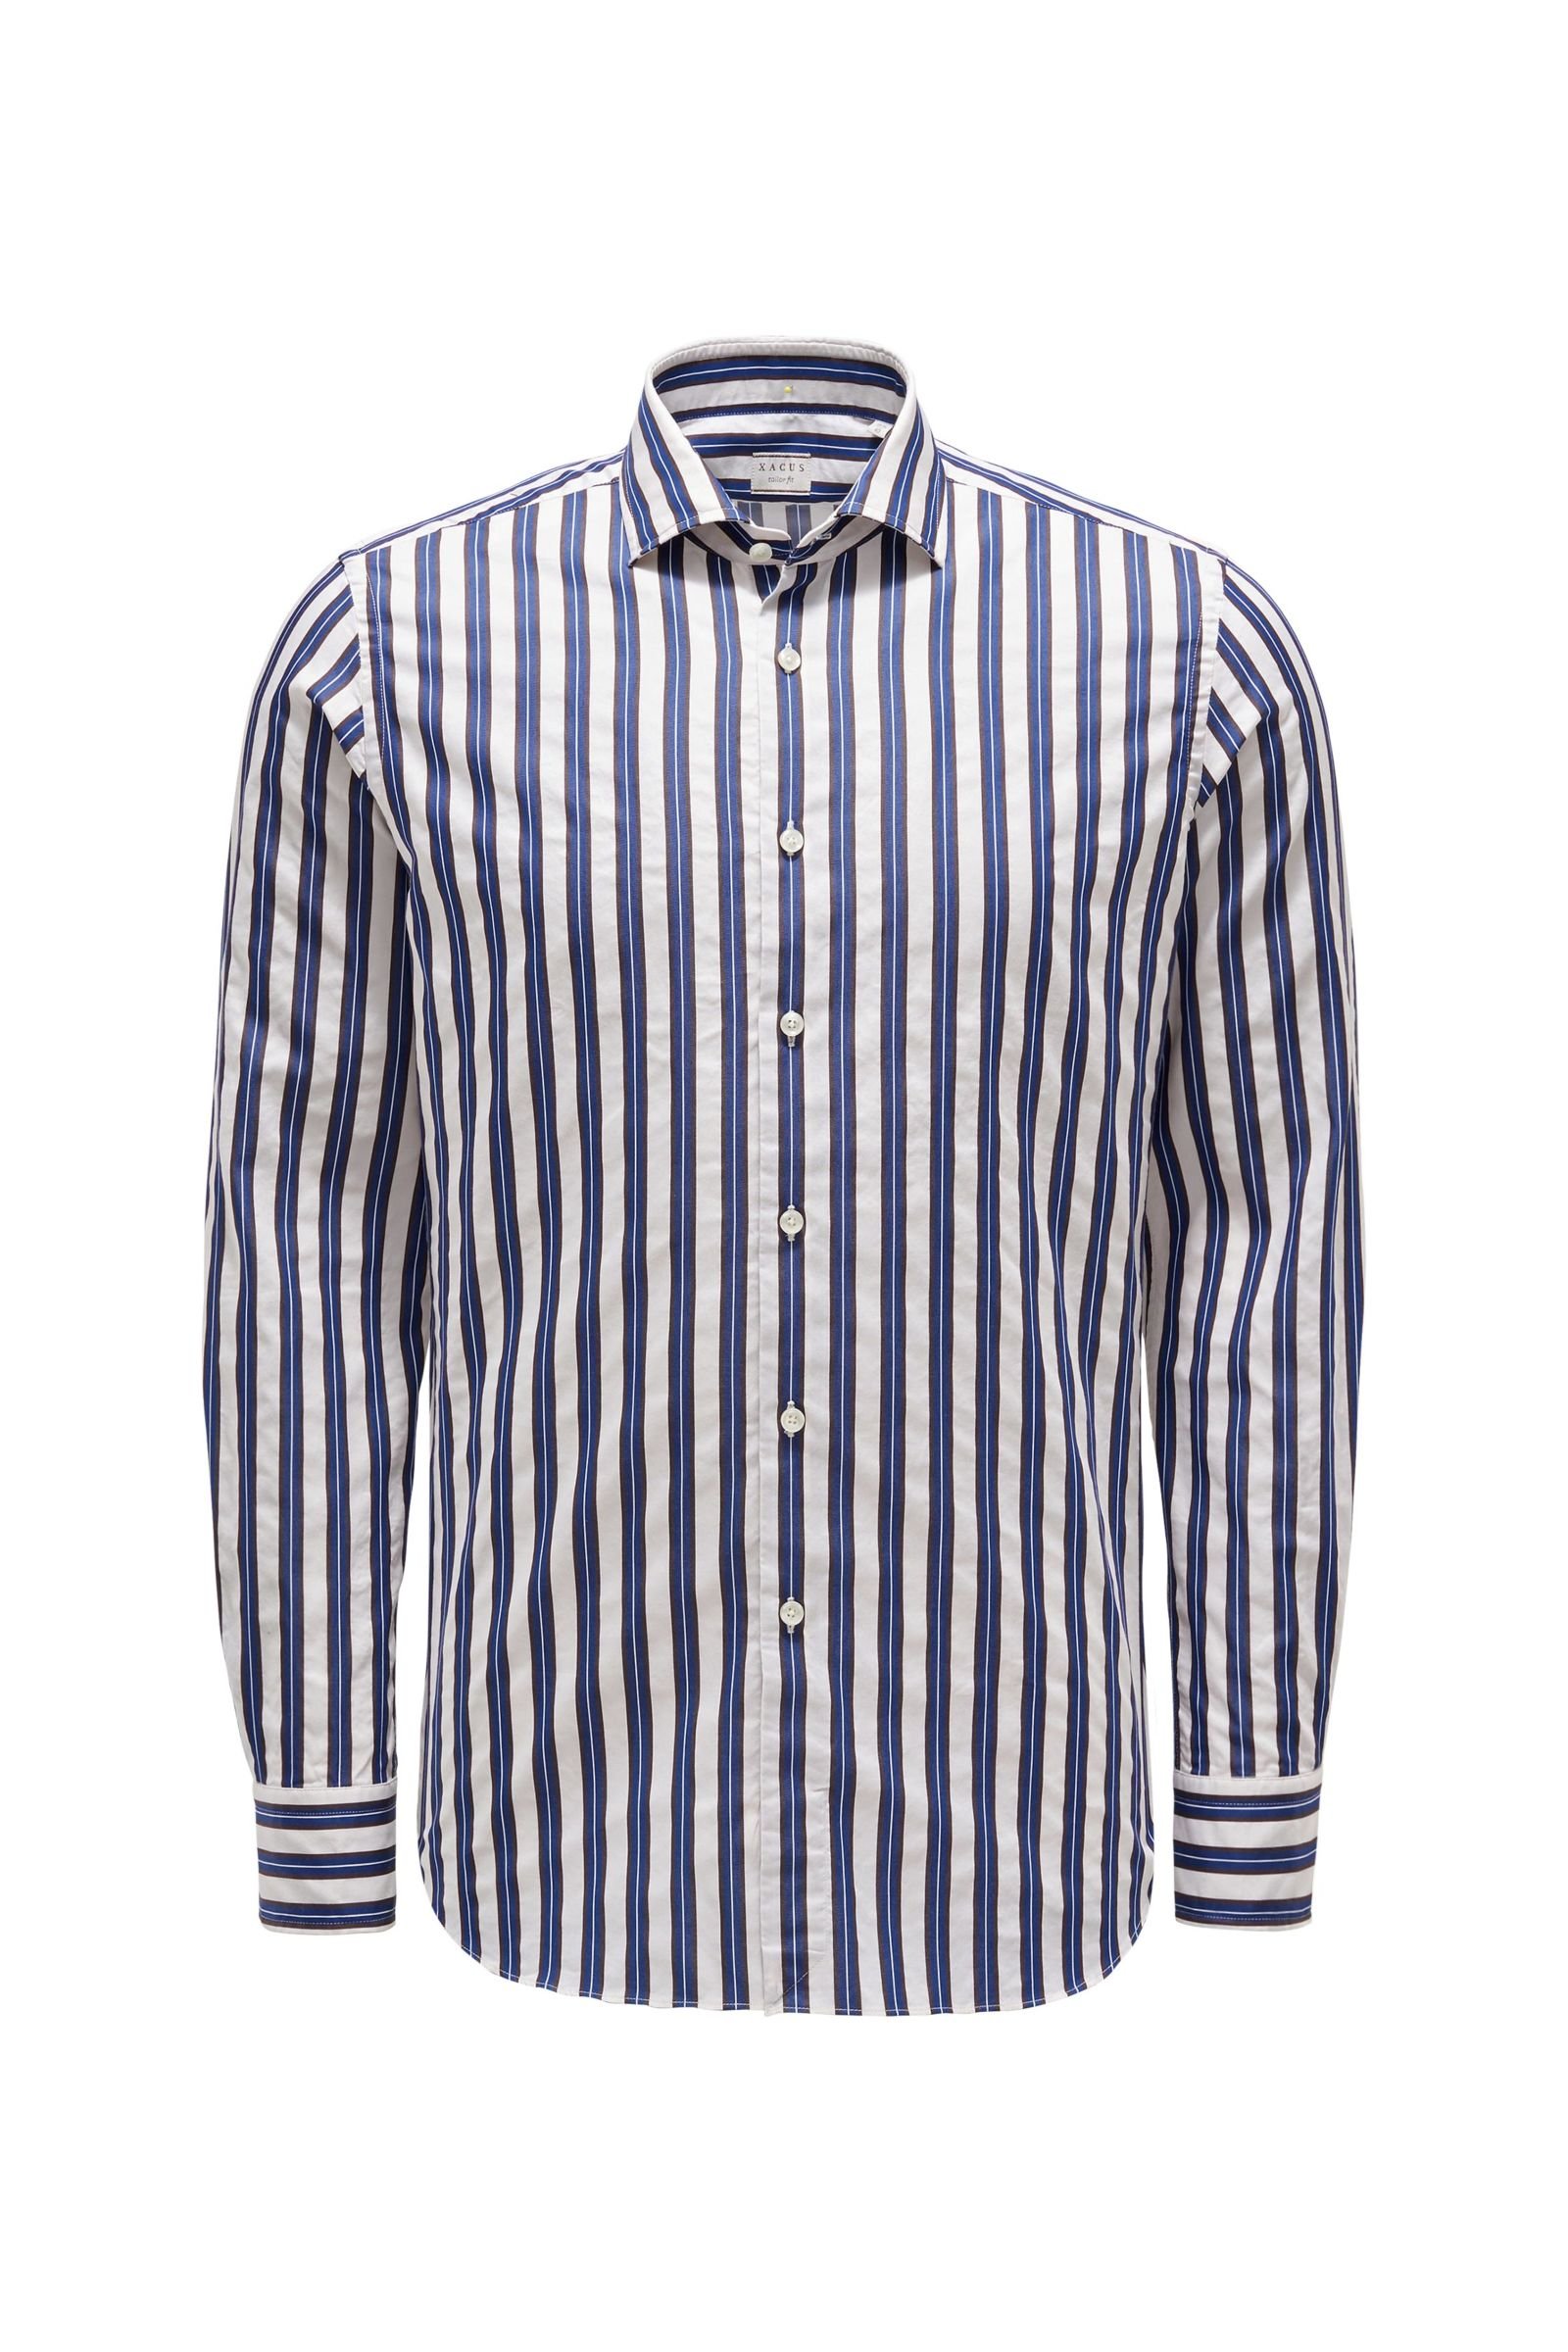 Casual shirt 'Tailor Fit' shark collar navy/off-white striped